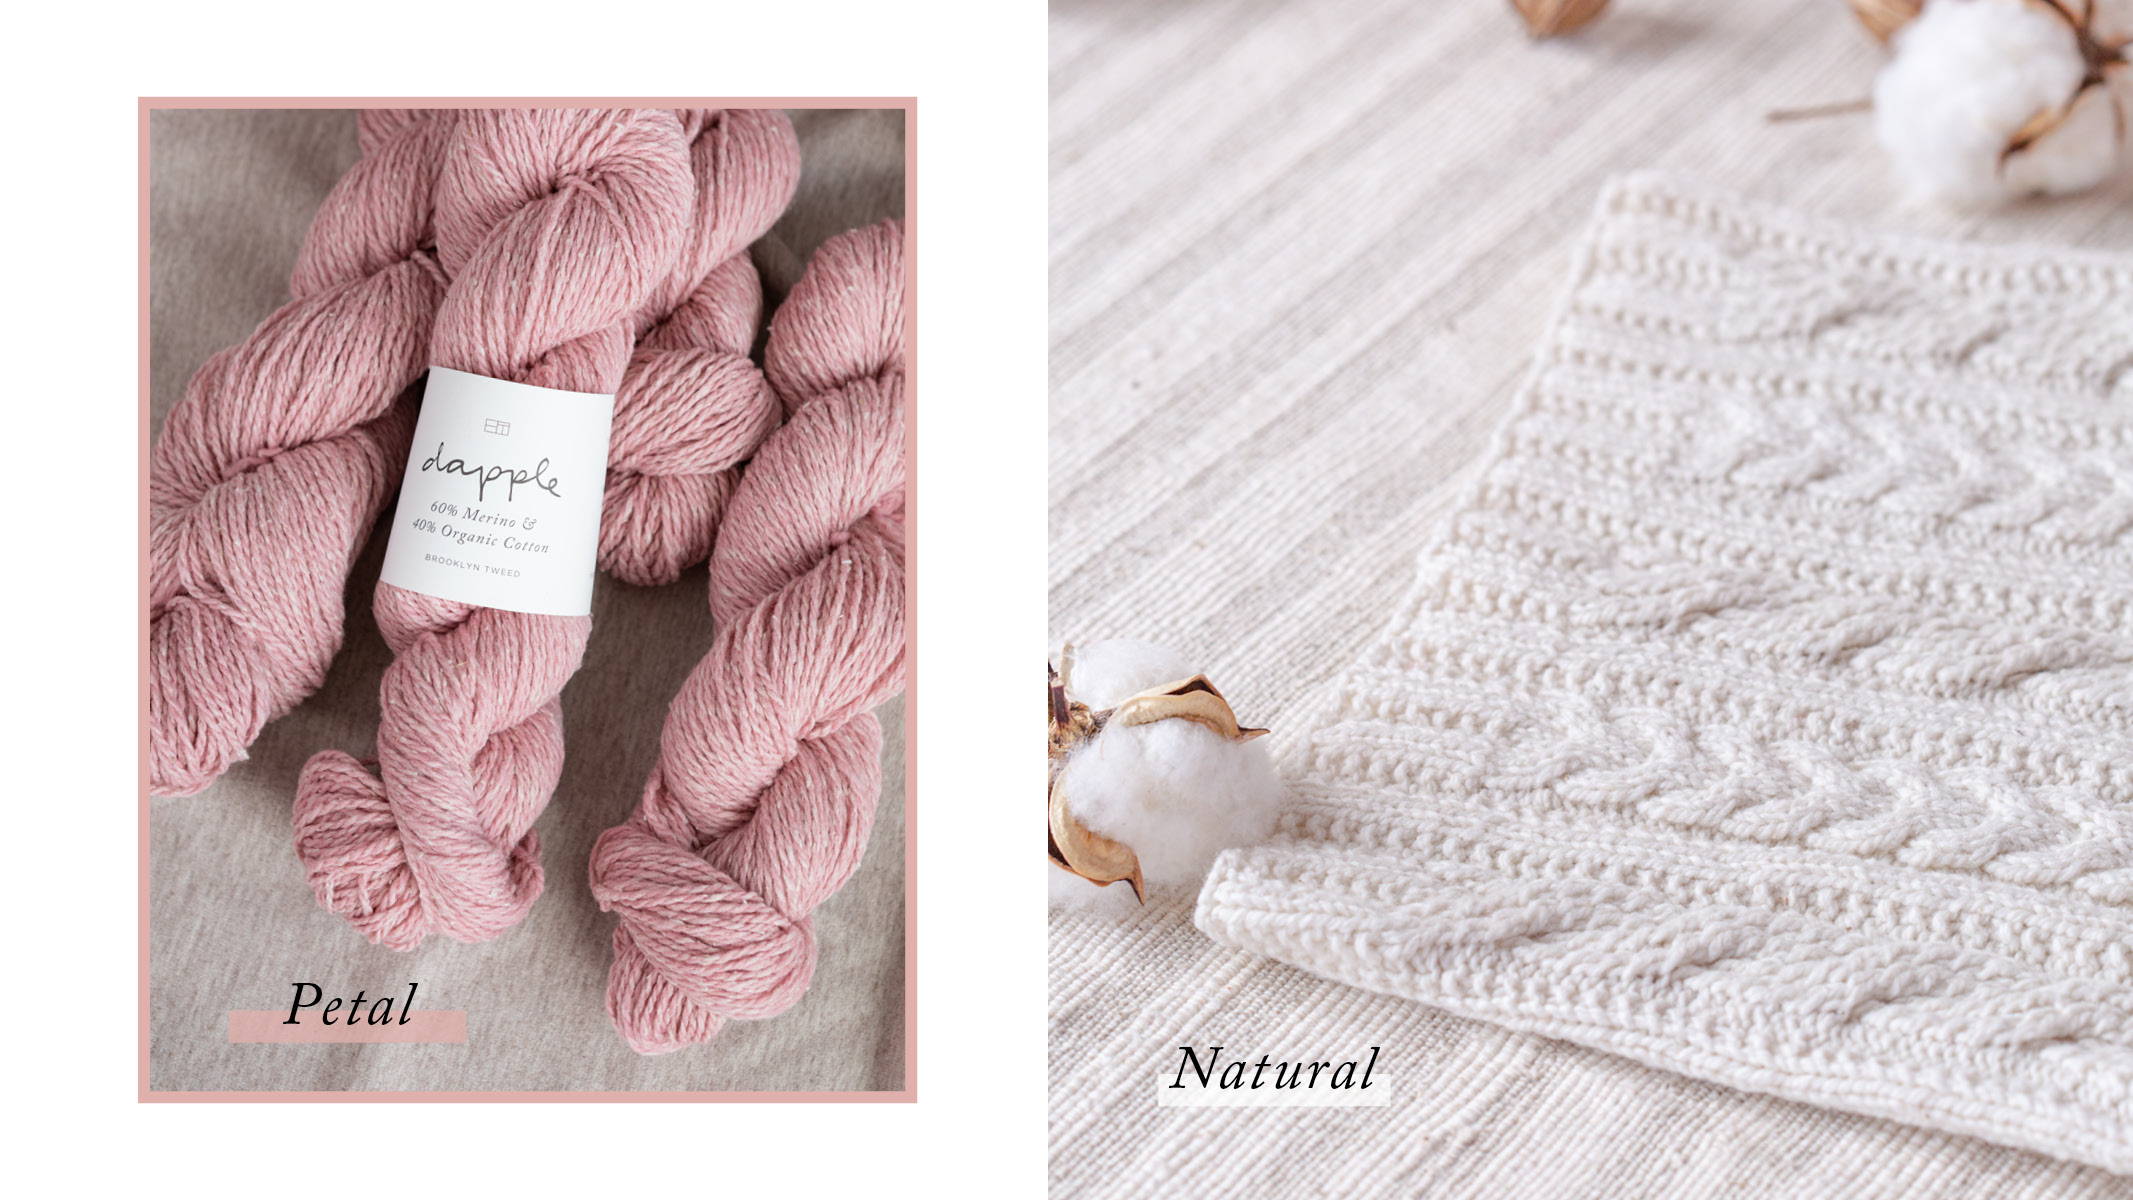 Right: A handknit cabled cowl in Dapple color Natural with cotton flowers. Left: A pile of 5 skeins of Dapple in color Petal, one with ball band (label).